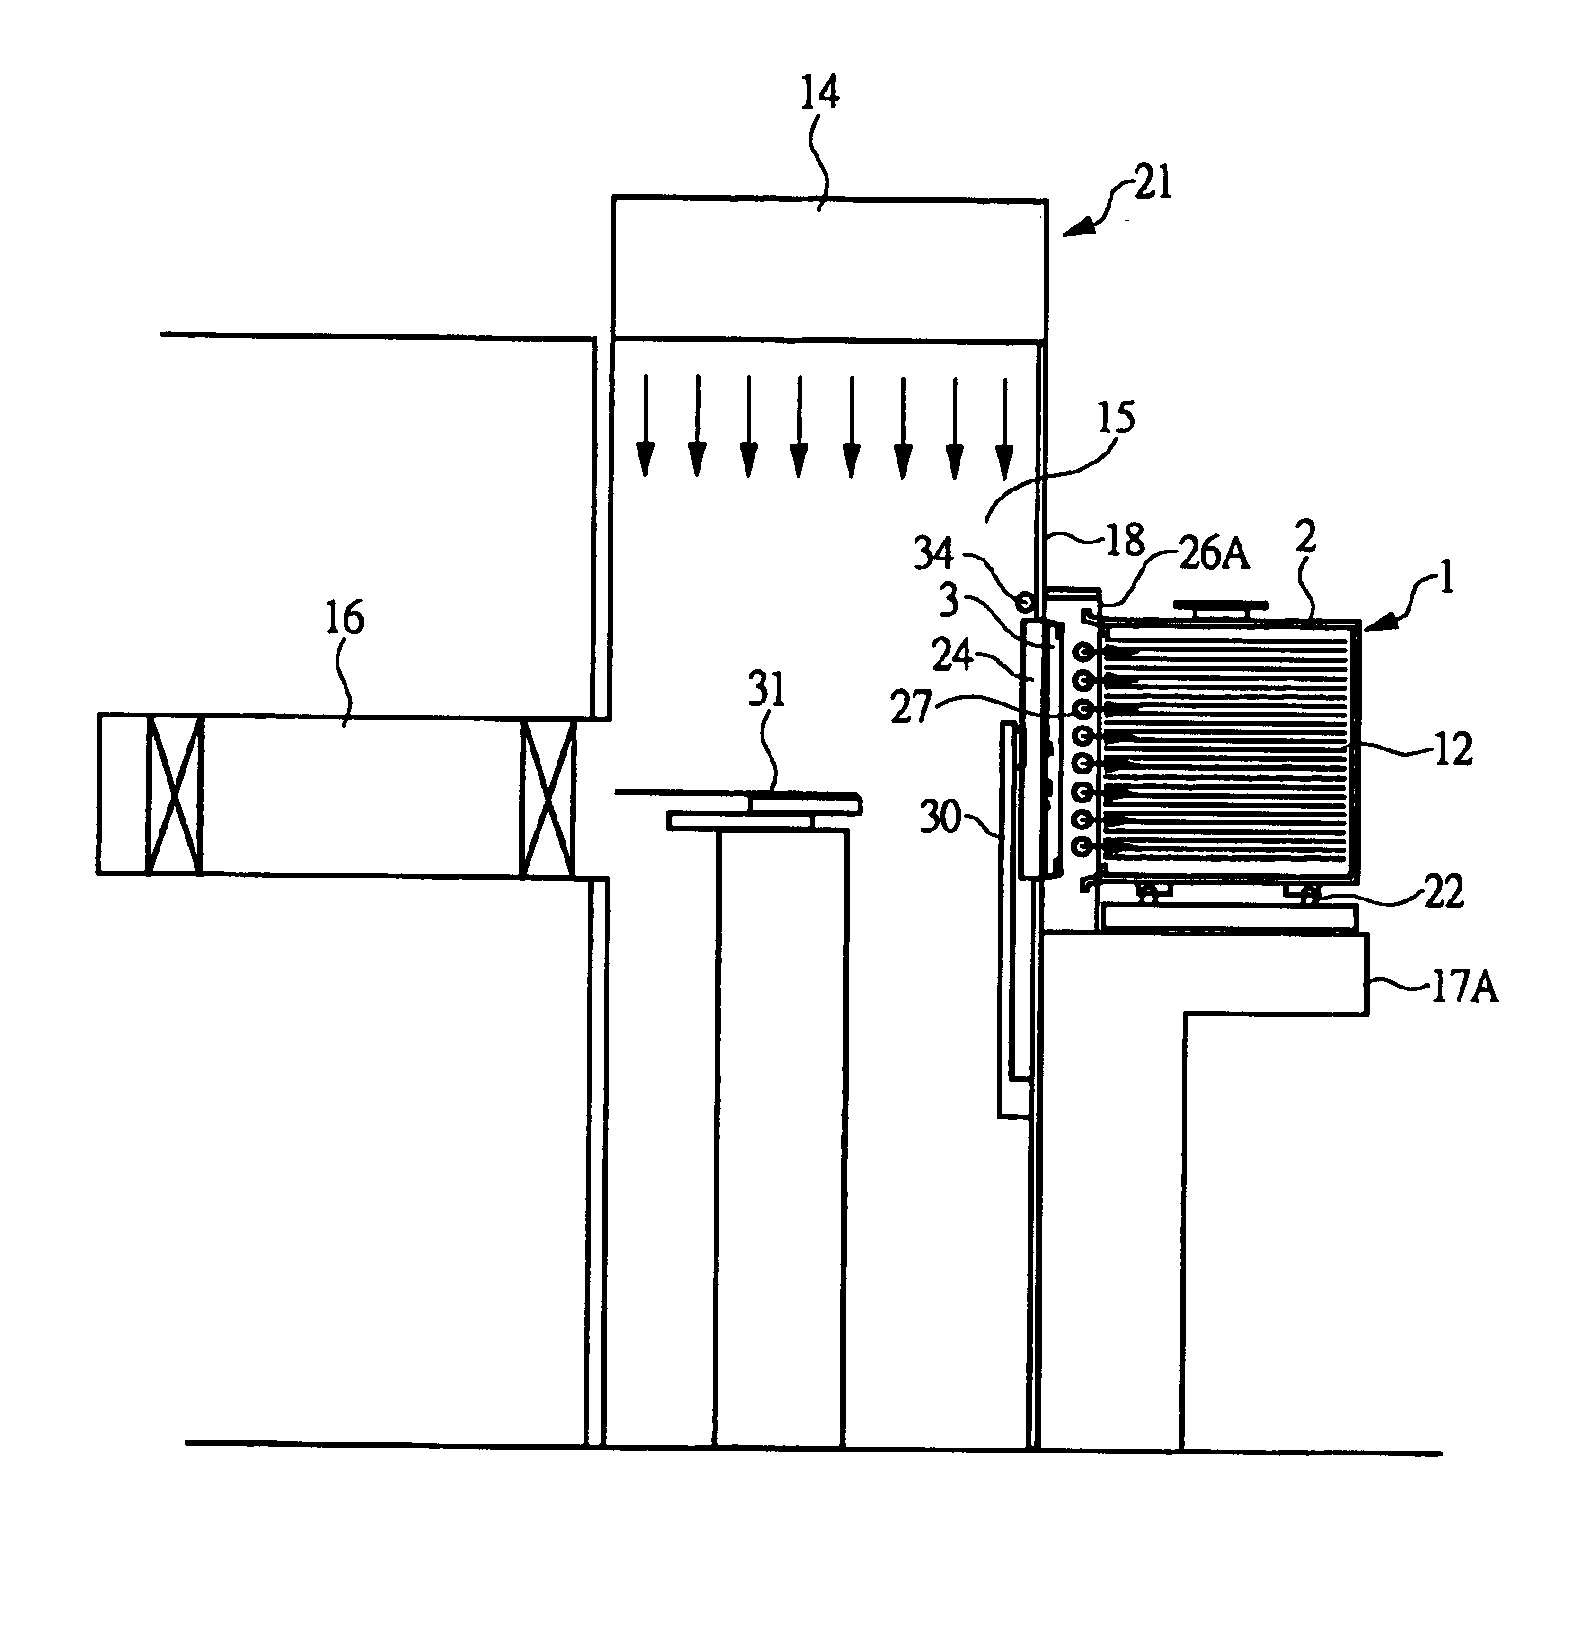 Method of purging wafer receiving jig, wafer transfer device, and method of manufacturing semiconductor device